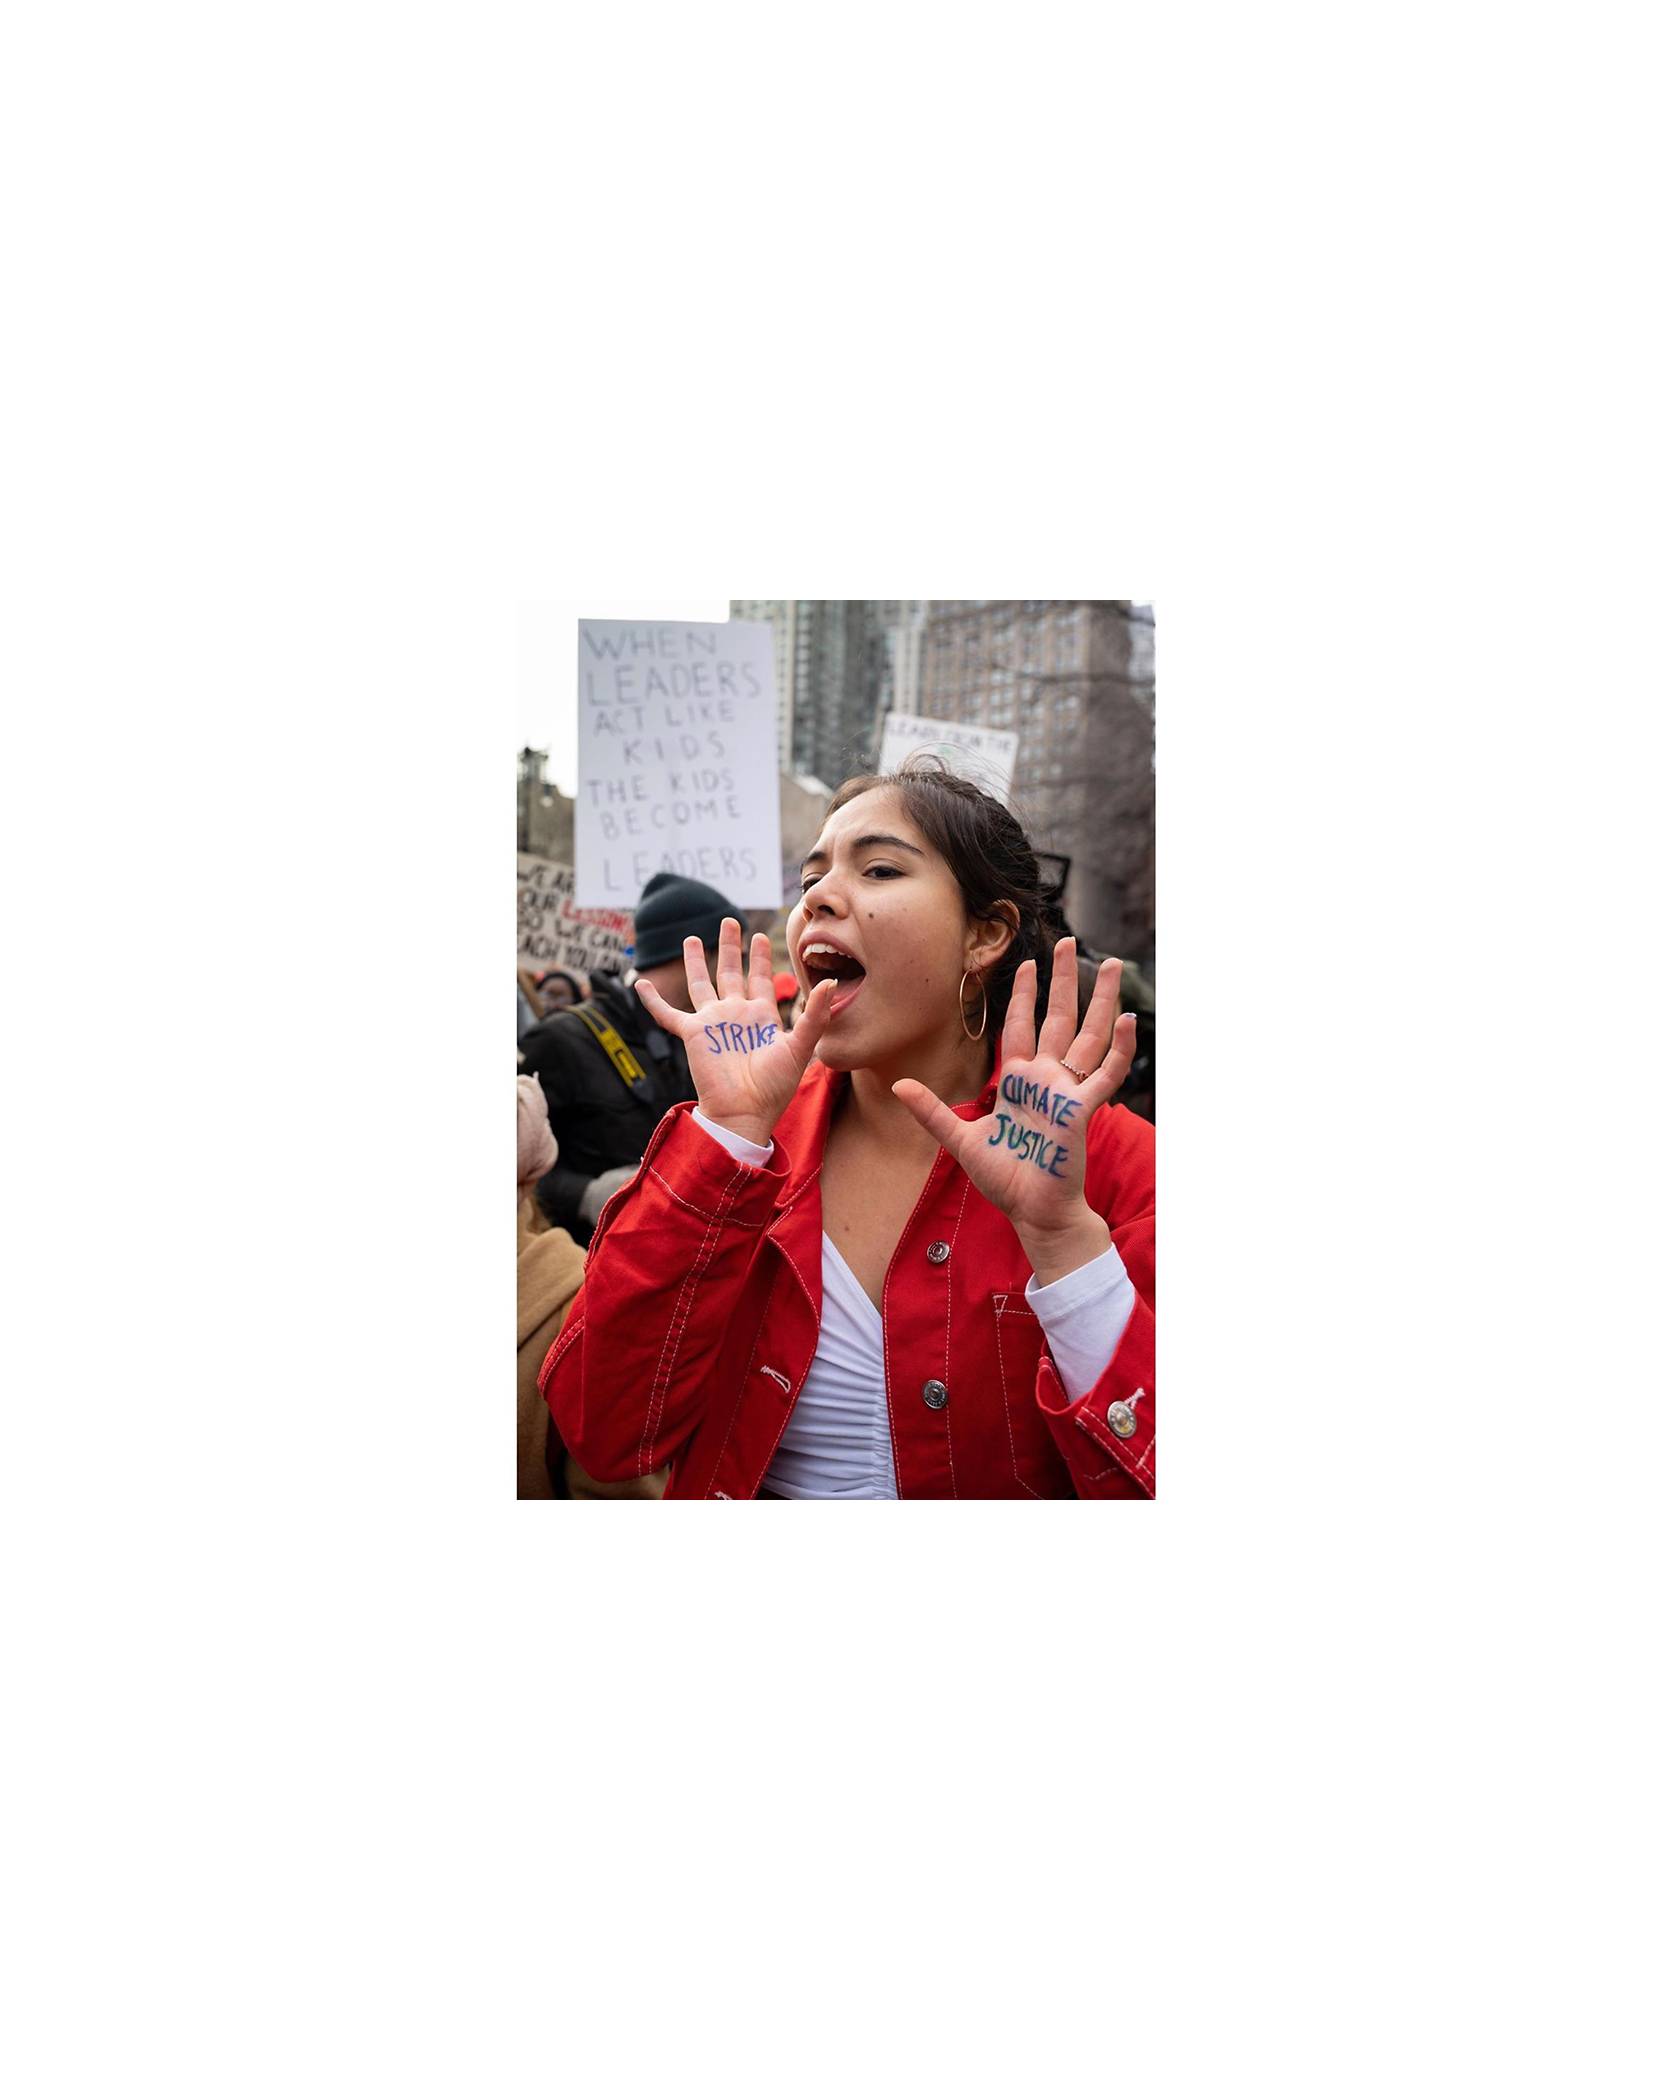 Photo of Xiye Bastida with her palms raised to face the camera. One palm reads "CLIMATE JUSTICE" while the other palm reads "STRIKE" in black marker. She is wearing a white top and a red jacket.